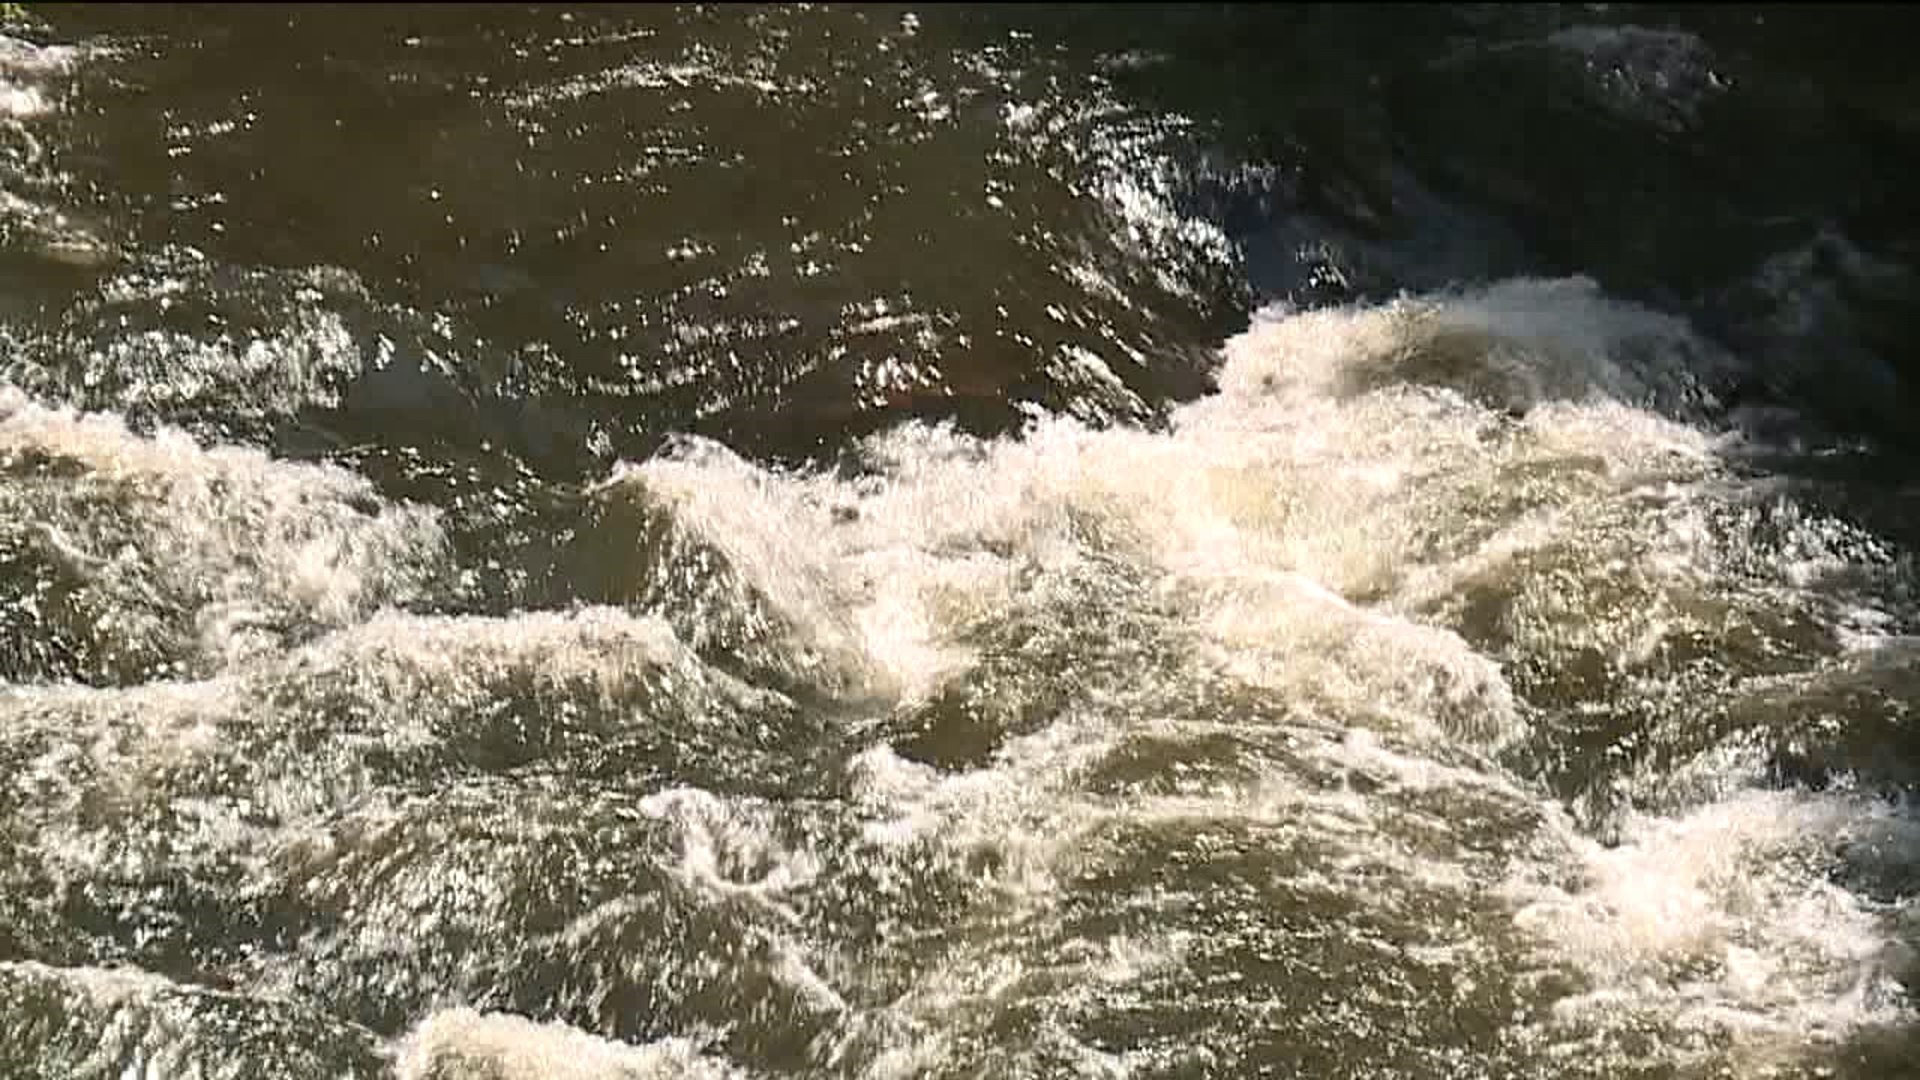 Body Found Not Far From Where Woman Went Missing in Nay Aug Gorge